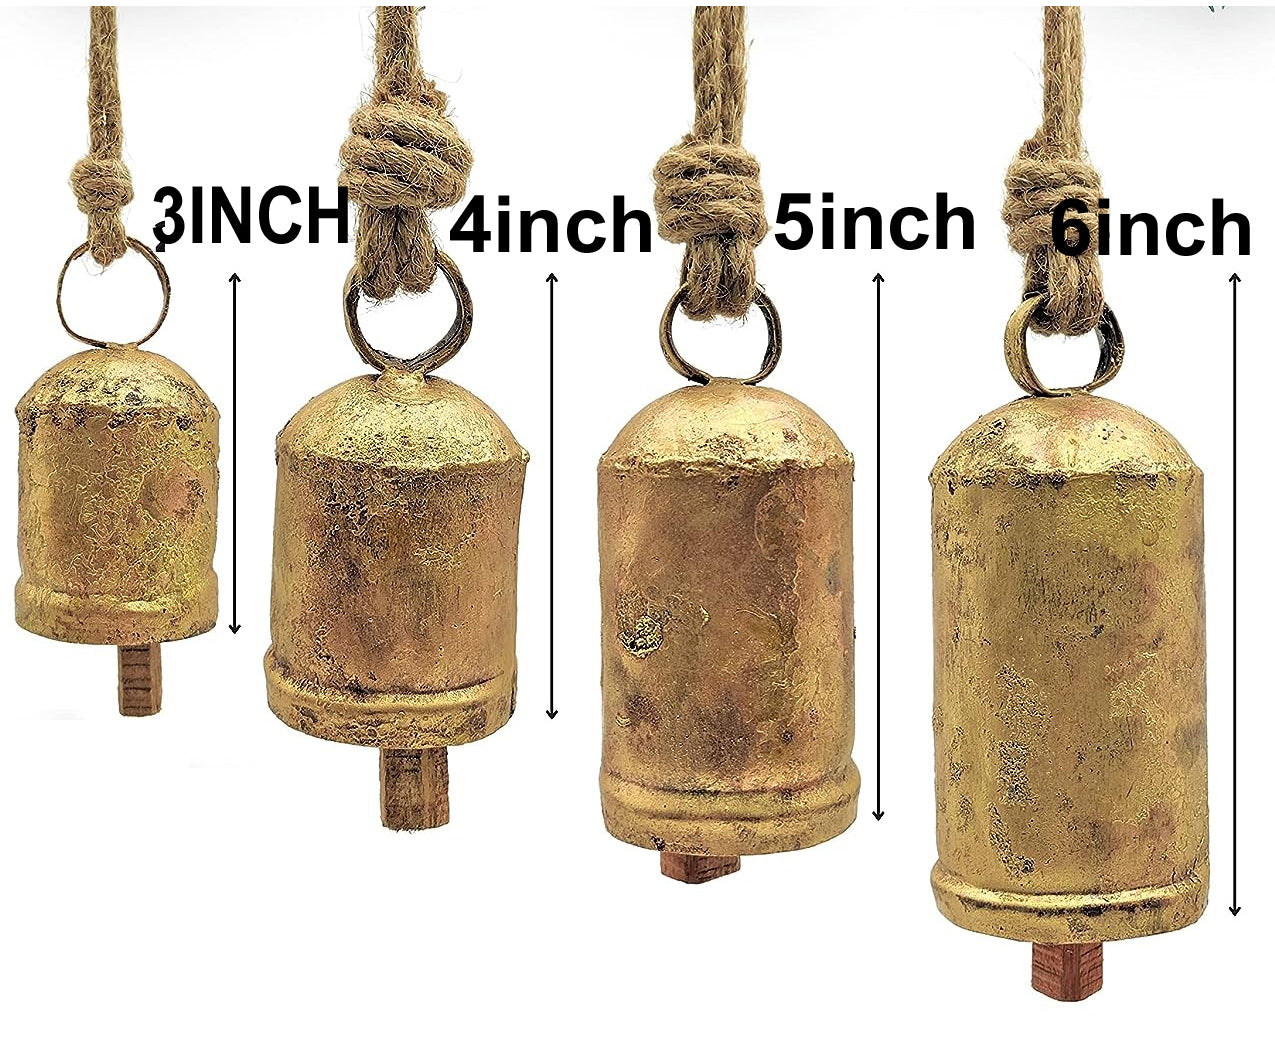 Set of 4 Harmony Cow Bells Vintage Rustic Lucky Christmas Hanging